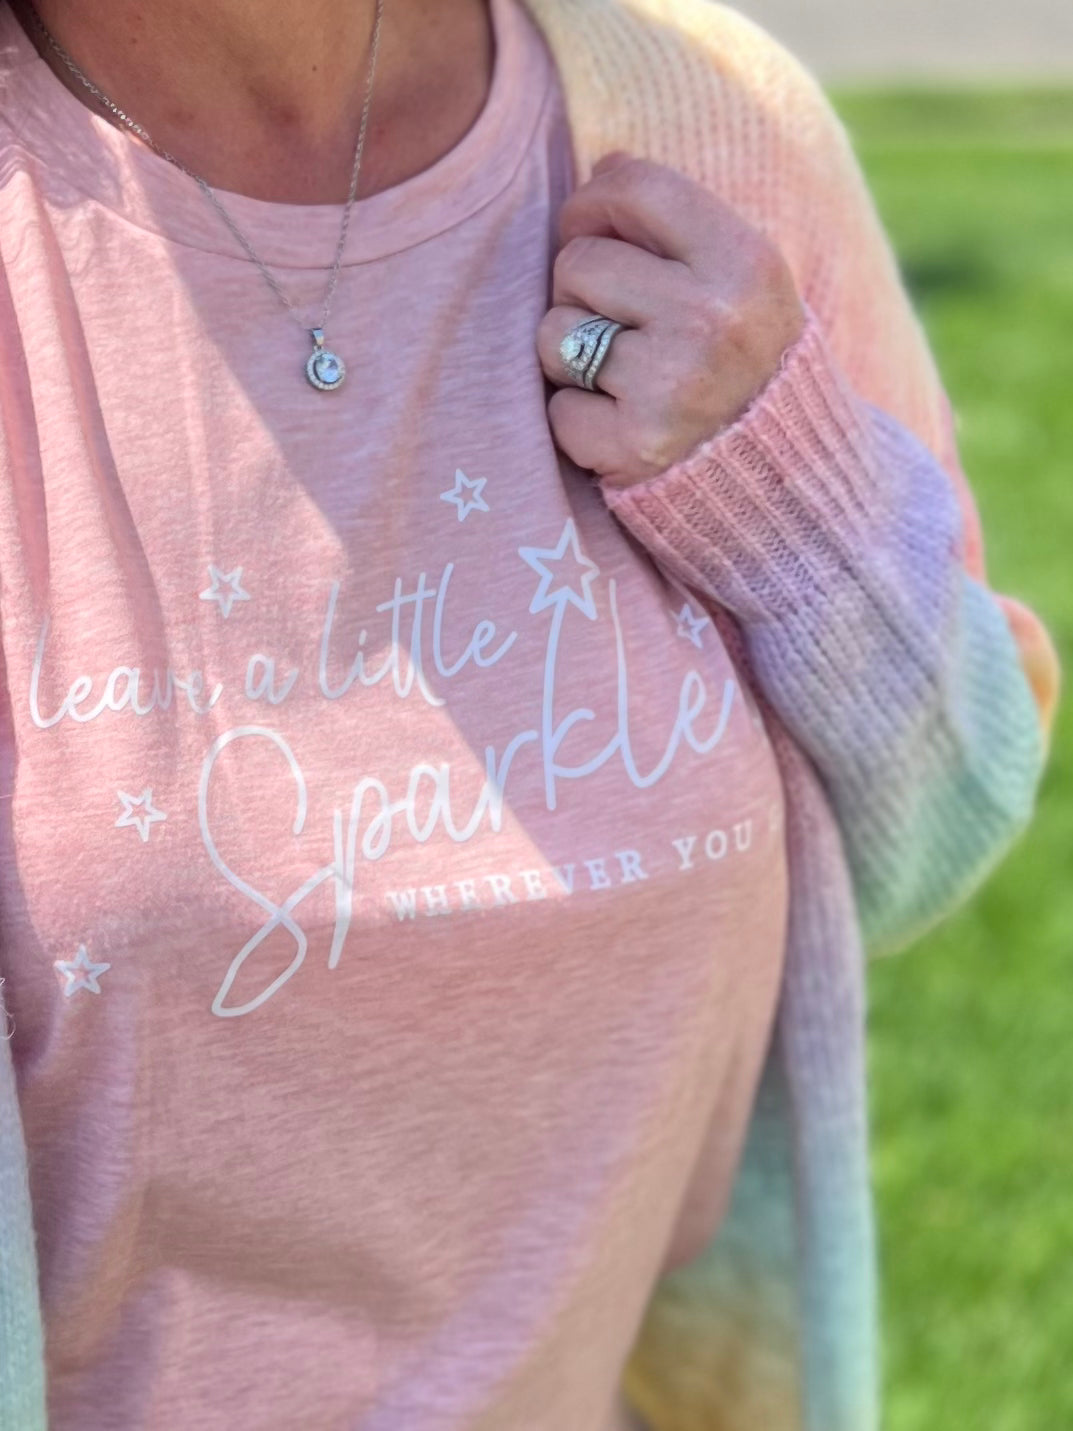 Leave a Little Sparkle Graphic Tee | 6 colors |